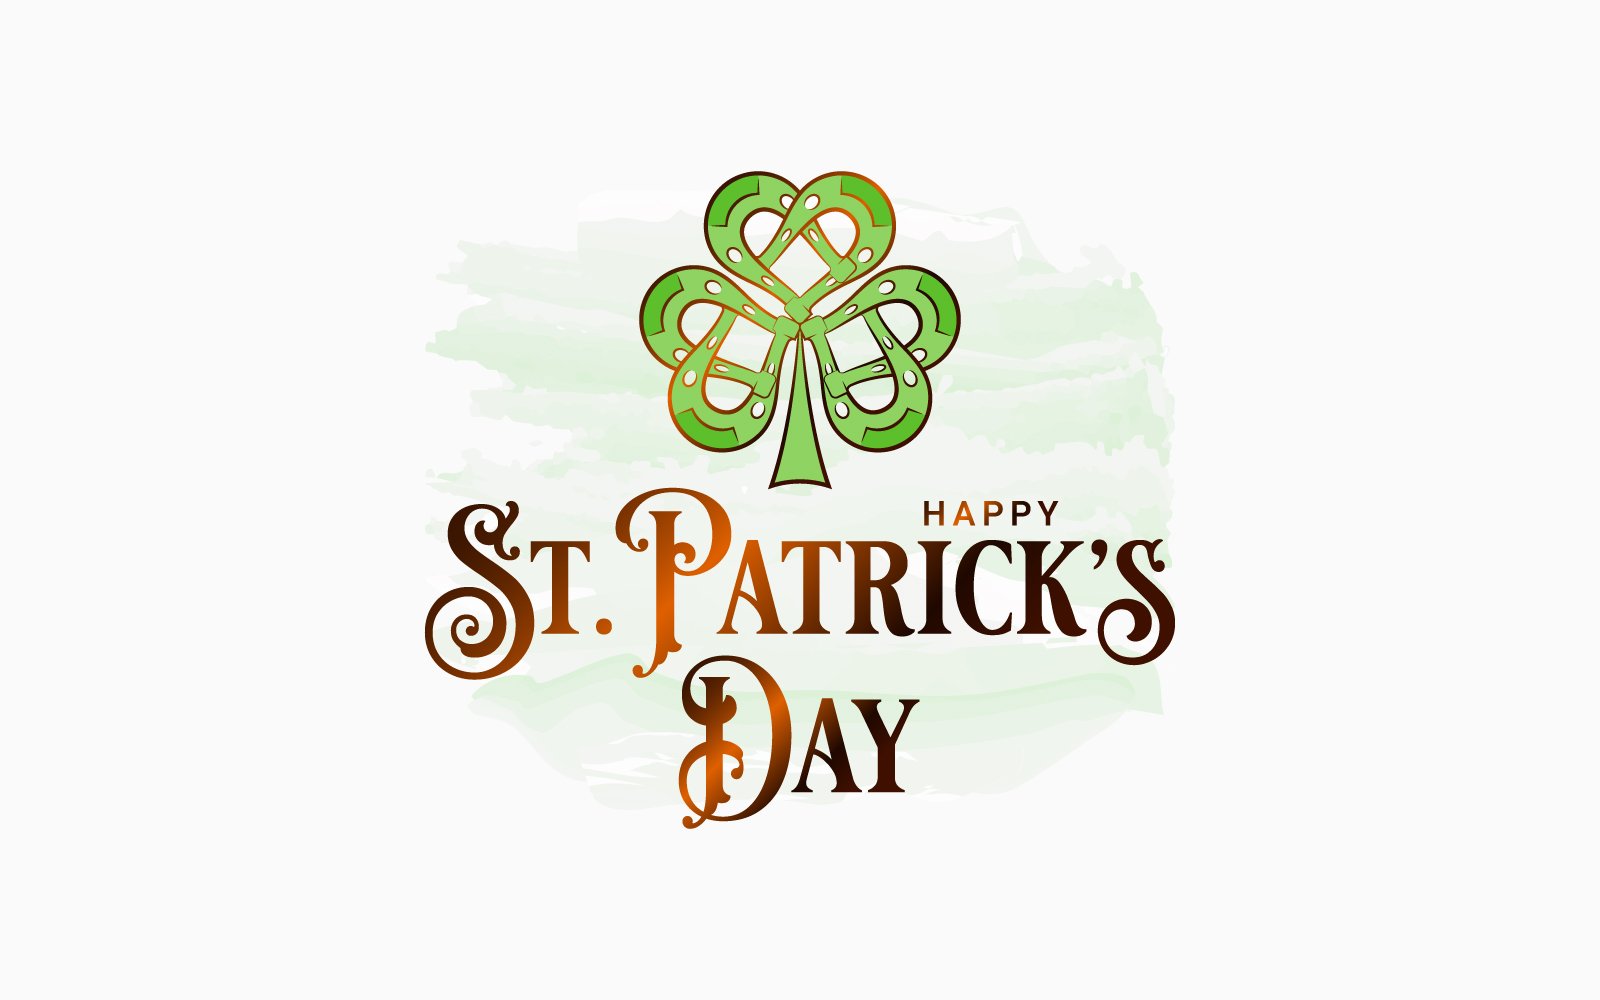 Patrick Day Gold Clover On White Background.